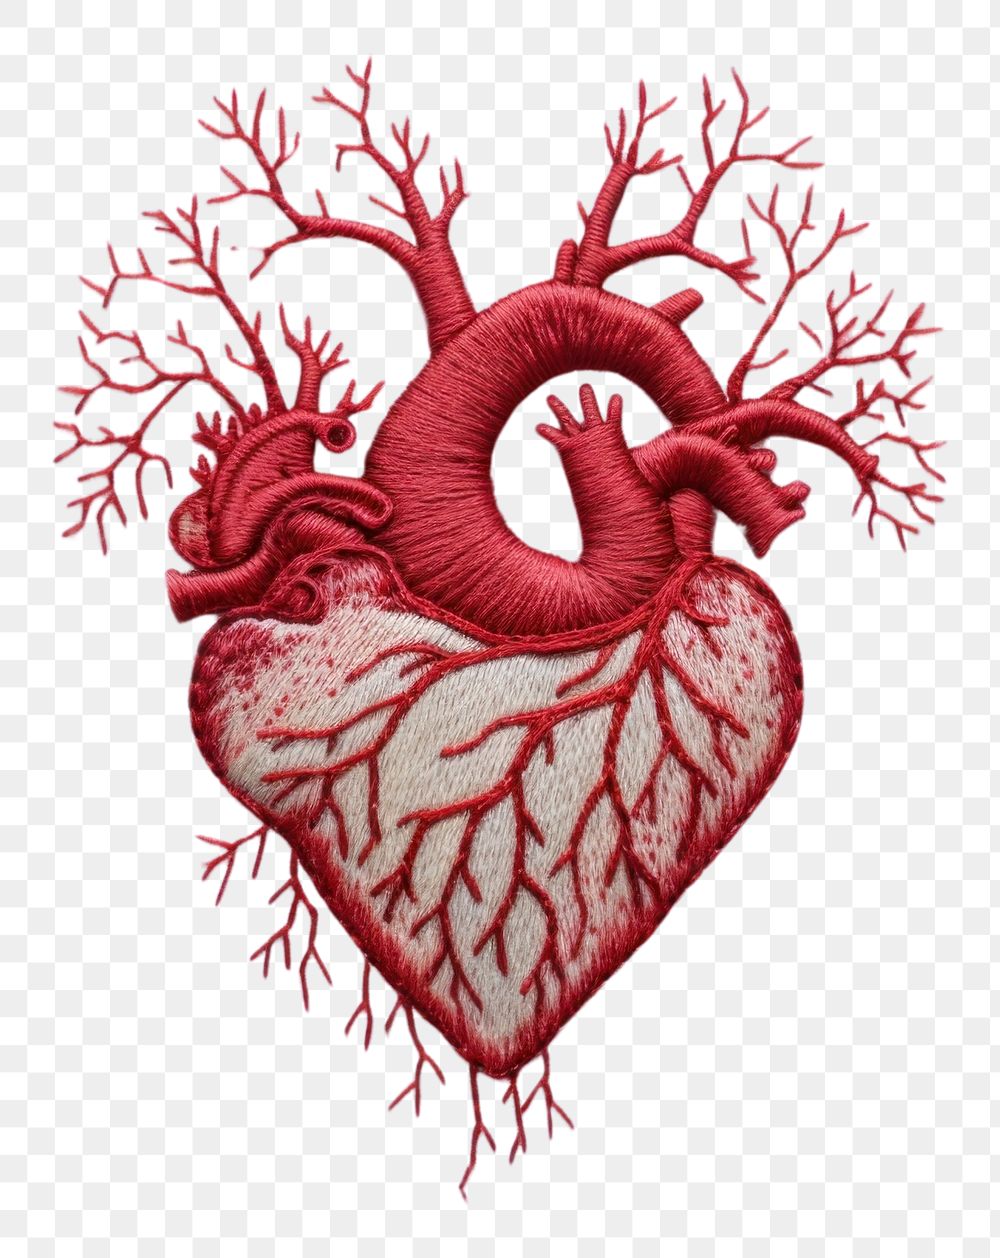 PNG The heart in embroidery style creativity anatomy drawing.